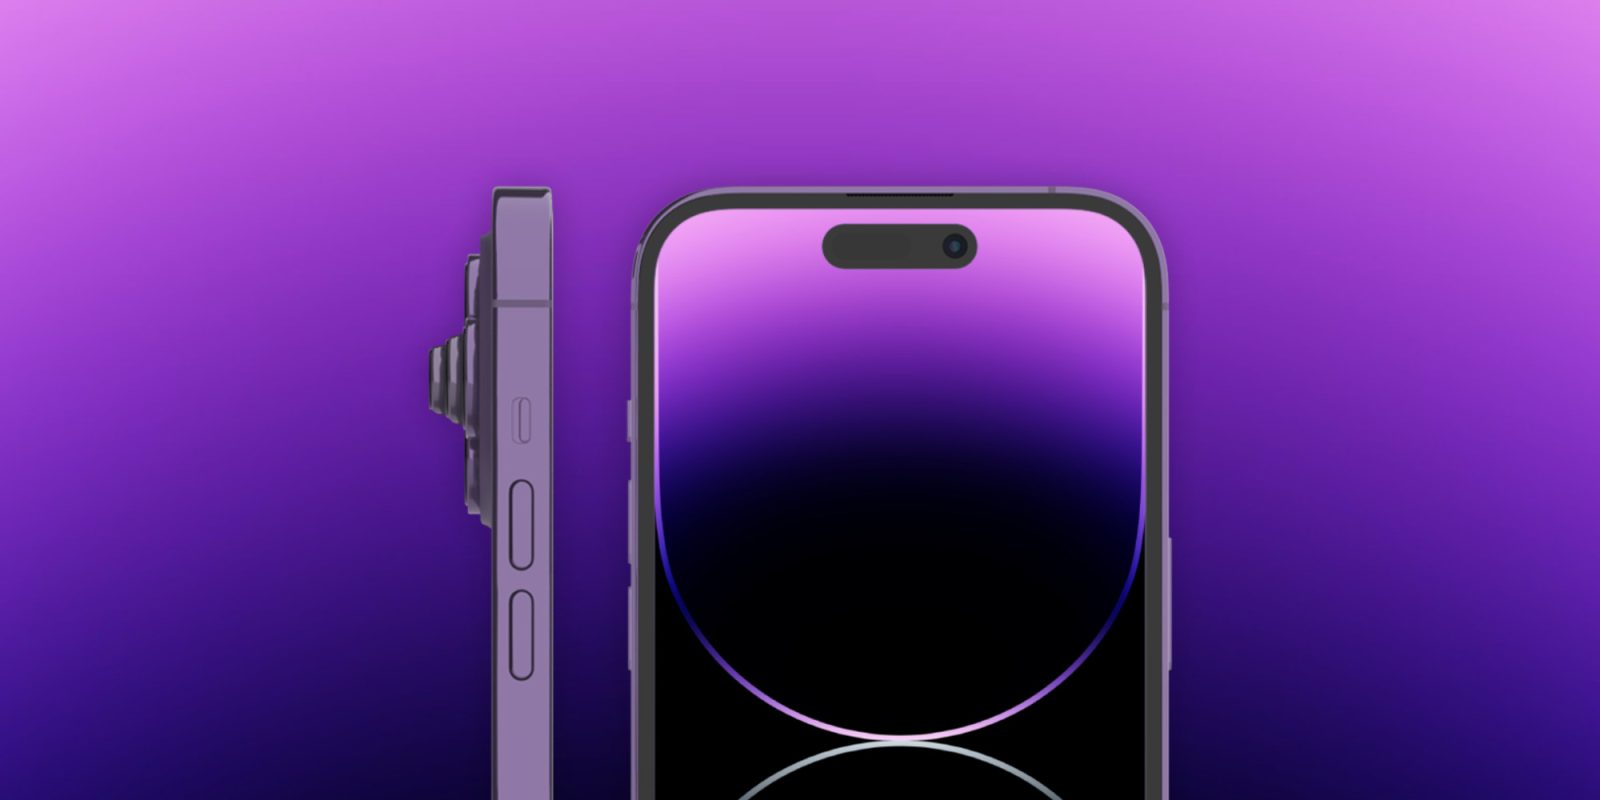 iPhone concept with a periscopic camera lens